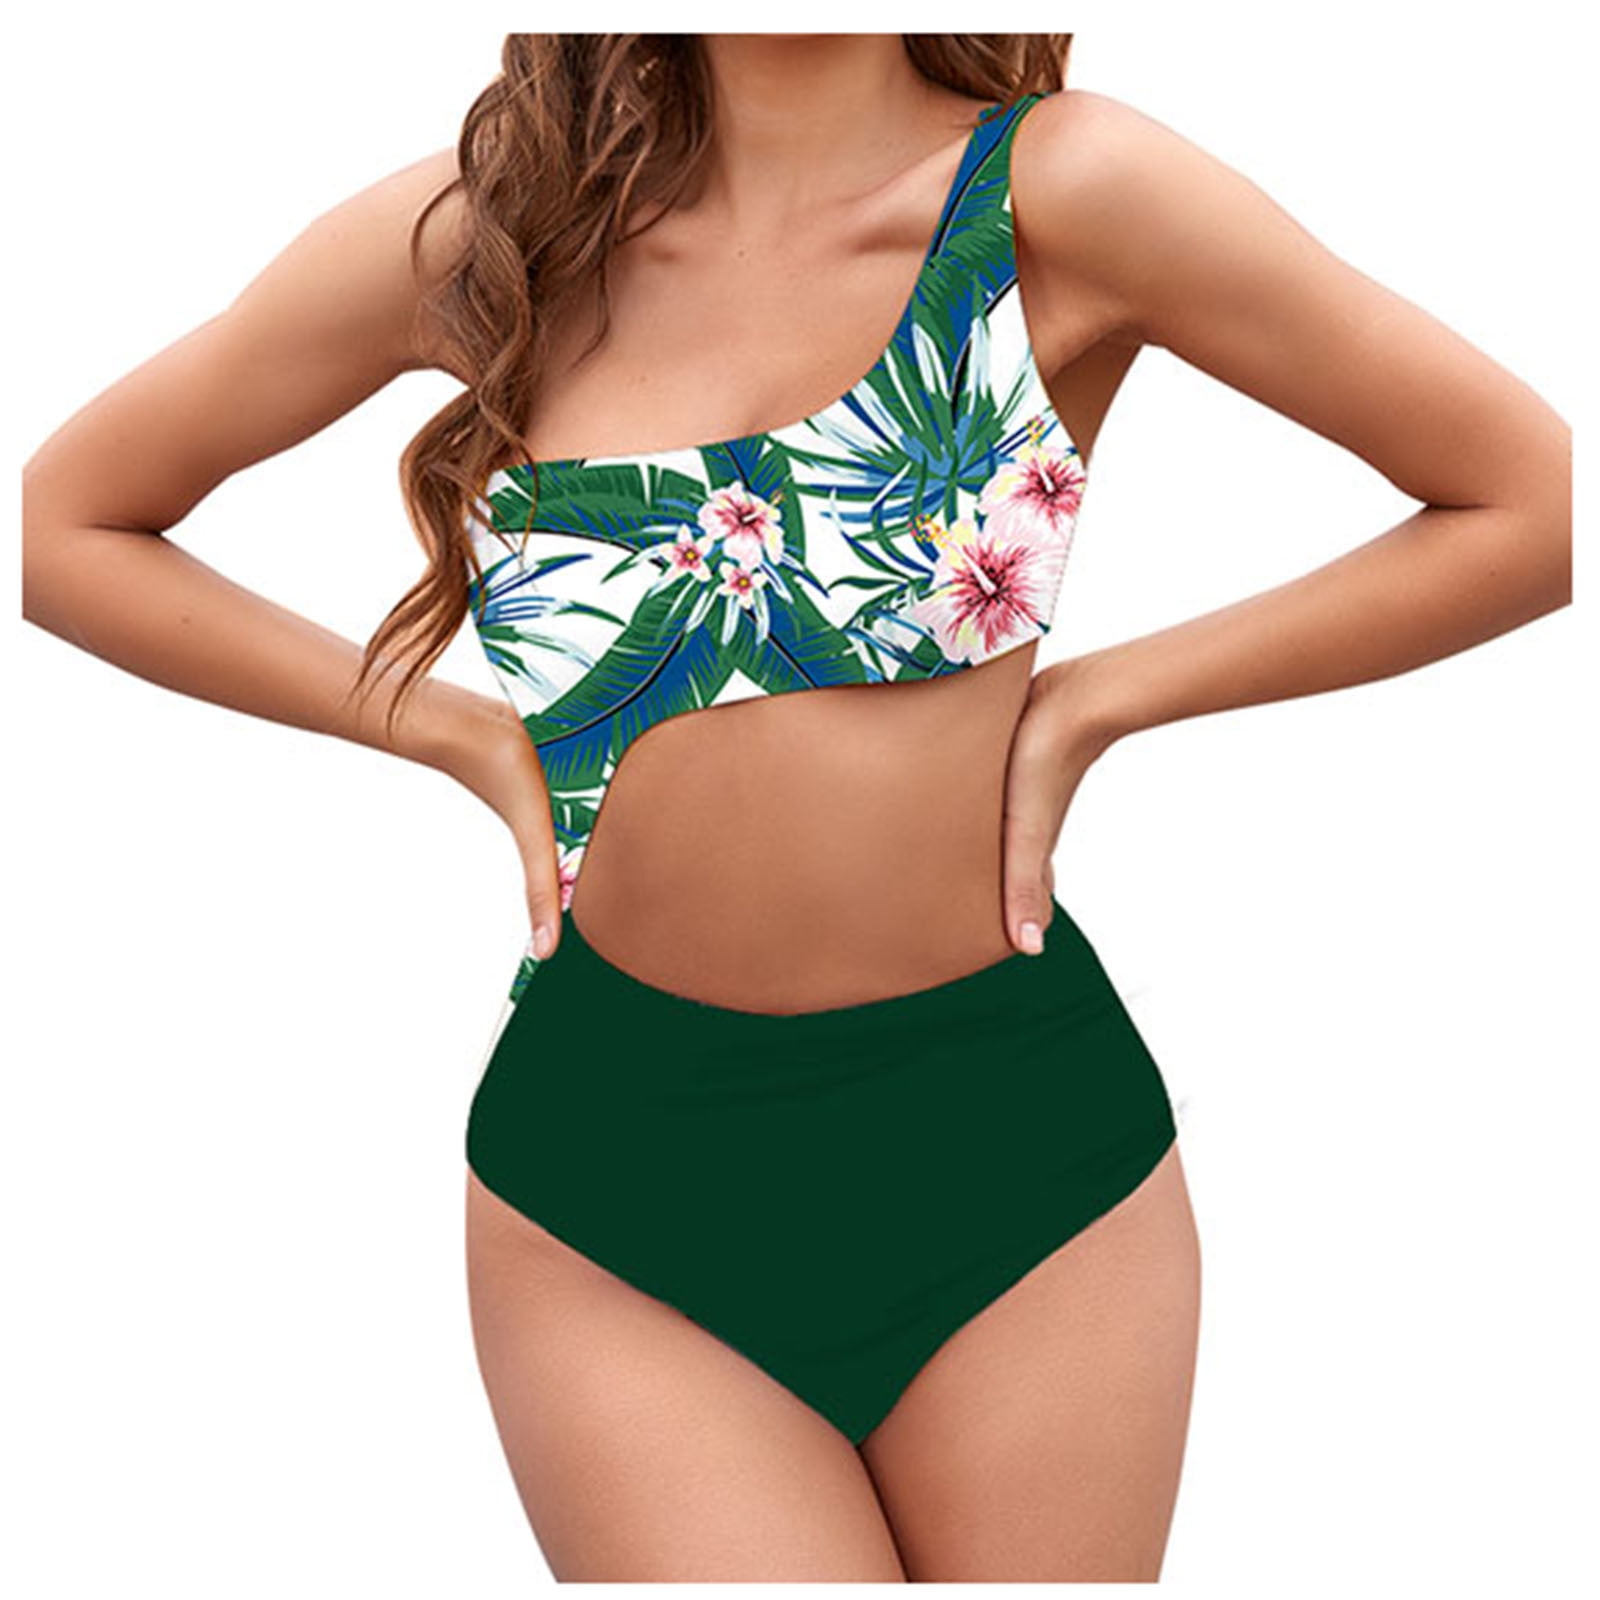 CAICJ98 Thong Bikini Swimsuit Athletic One Piece Swimsuits for Women  Training Sport Tummy Control Bathing Suits Green,XL